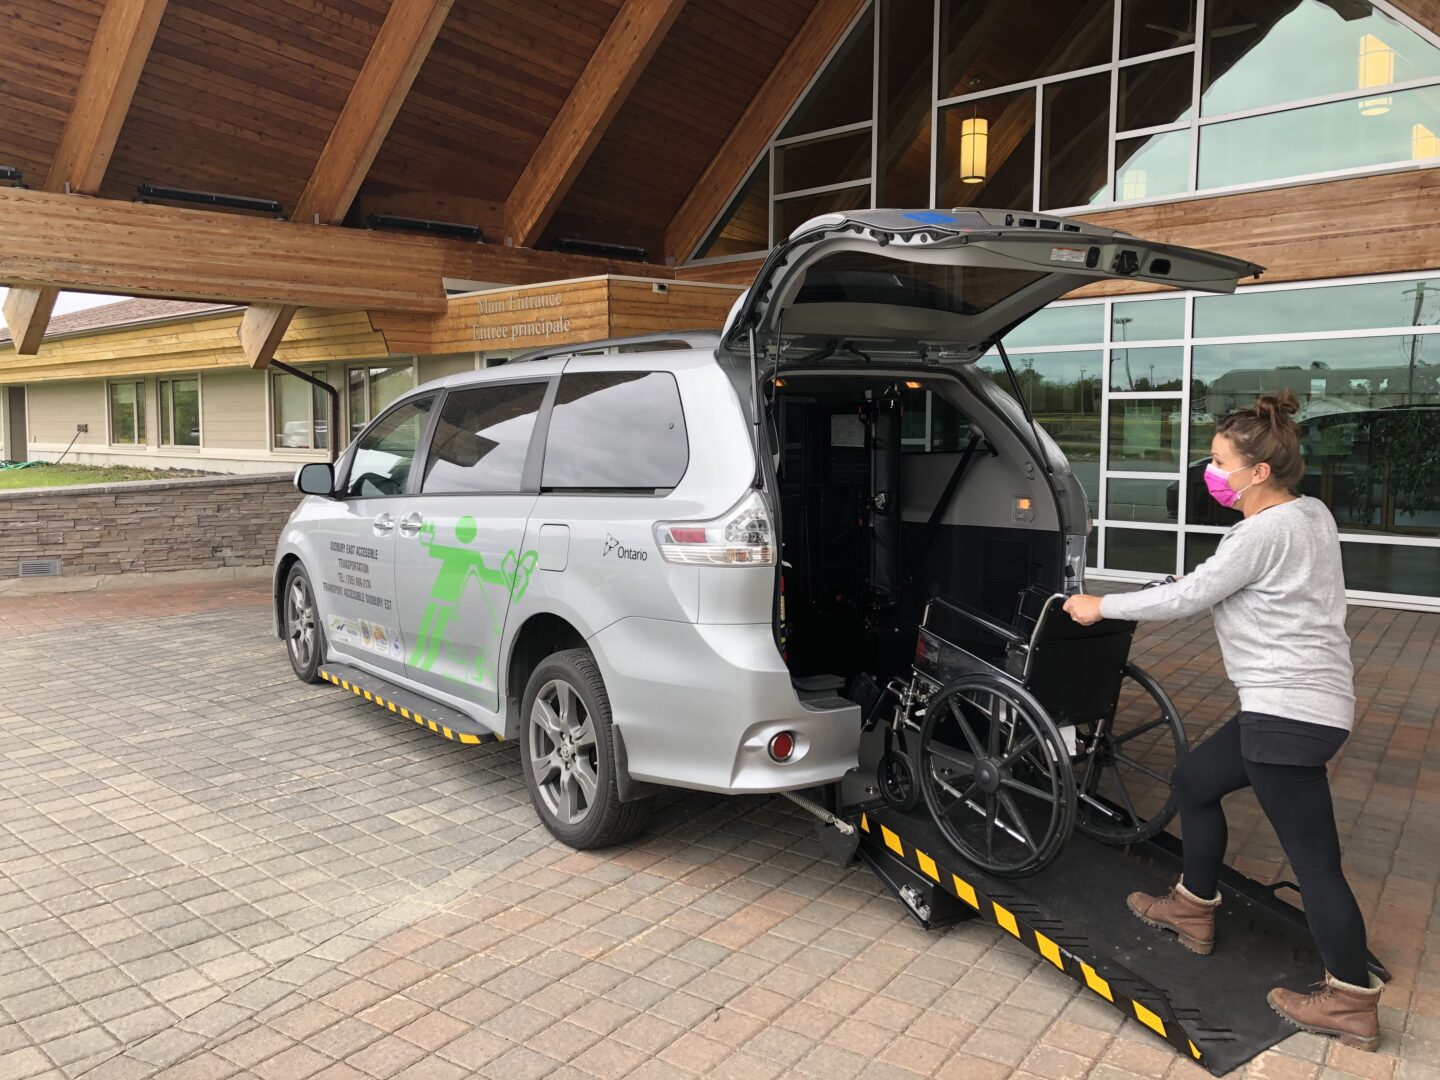 Rear image of the minivan with tailgate and ramp opened for wheelchairs, dedicated to the SEAT project, Sudbury East Accessible Transportation.